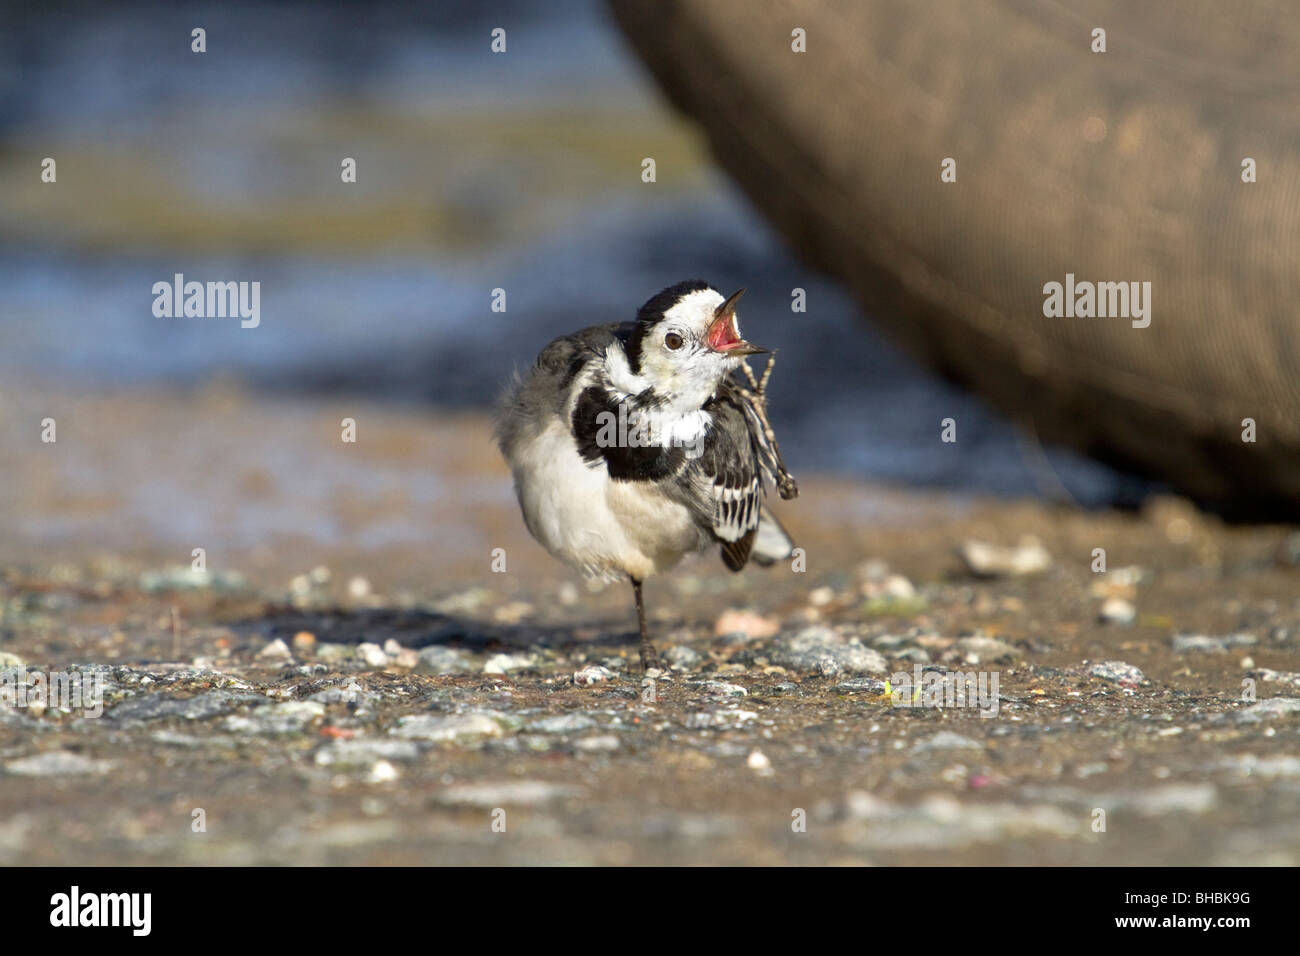 Pied Wagtail; Motacilla alba ssp yarellii; scratching; next to tyre Stock Photo